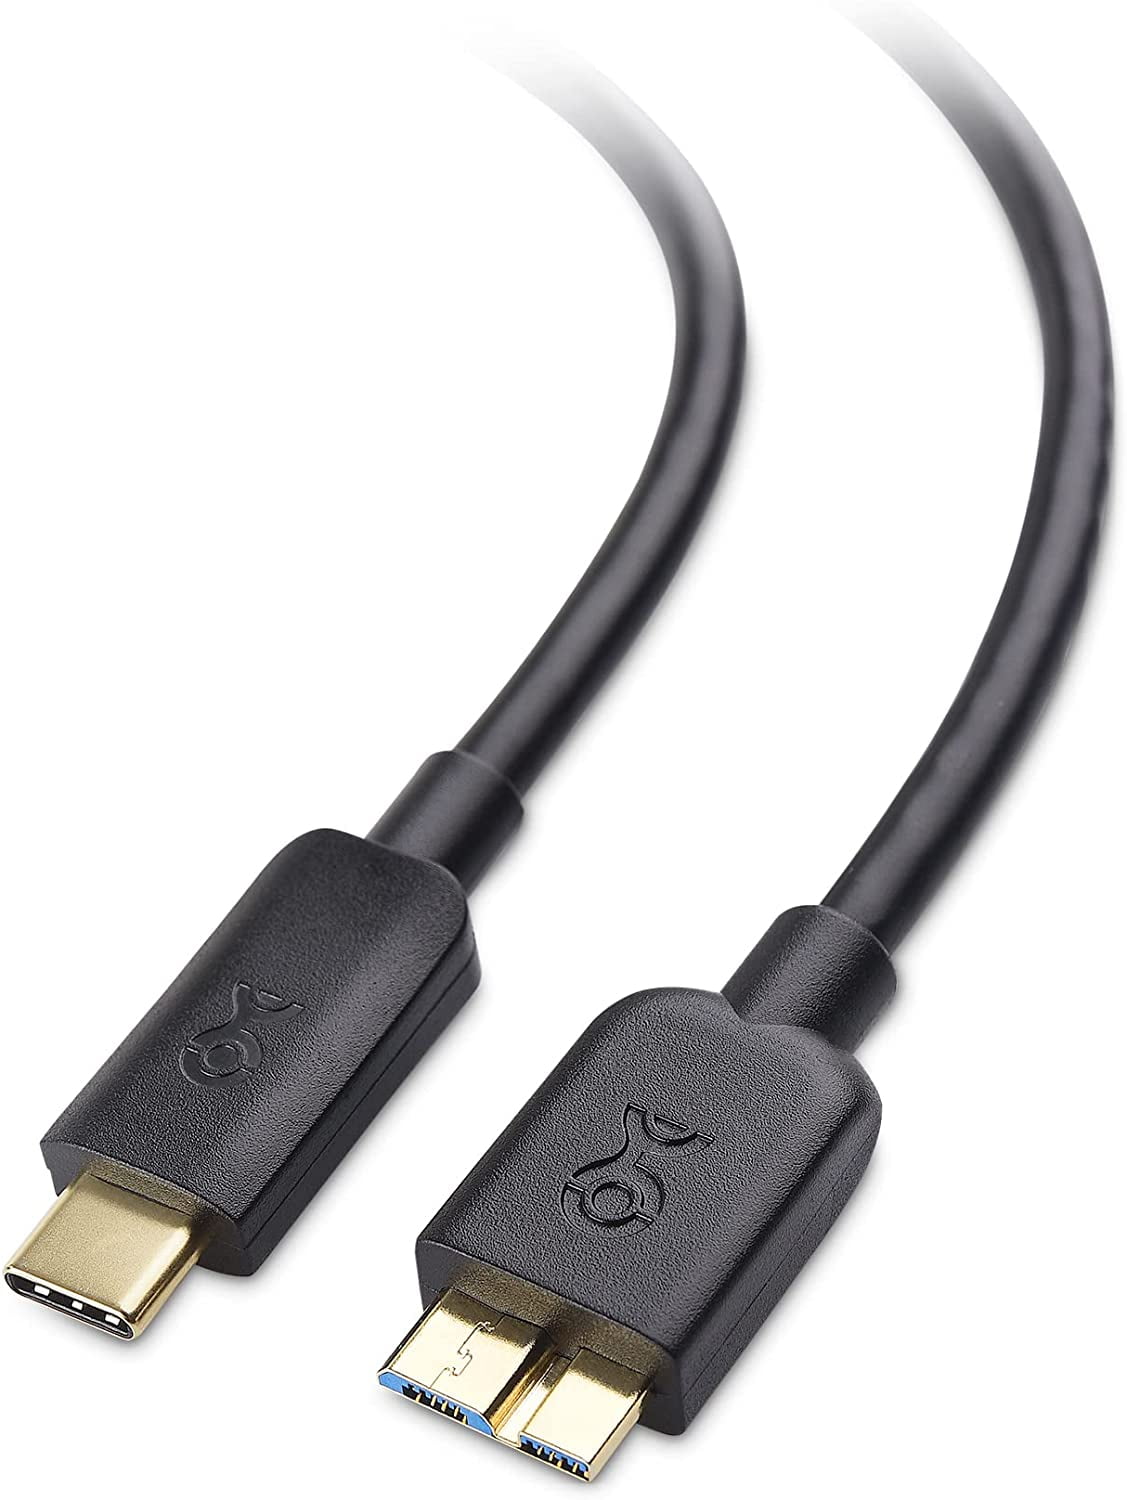 Matters USB C to USB Cable (USB C to Micro B USB C Hard Drive Cable) in Black 3.3 Feet - Walmart.com